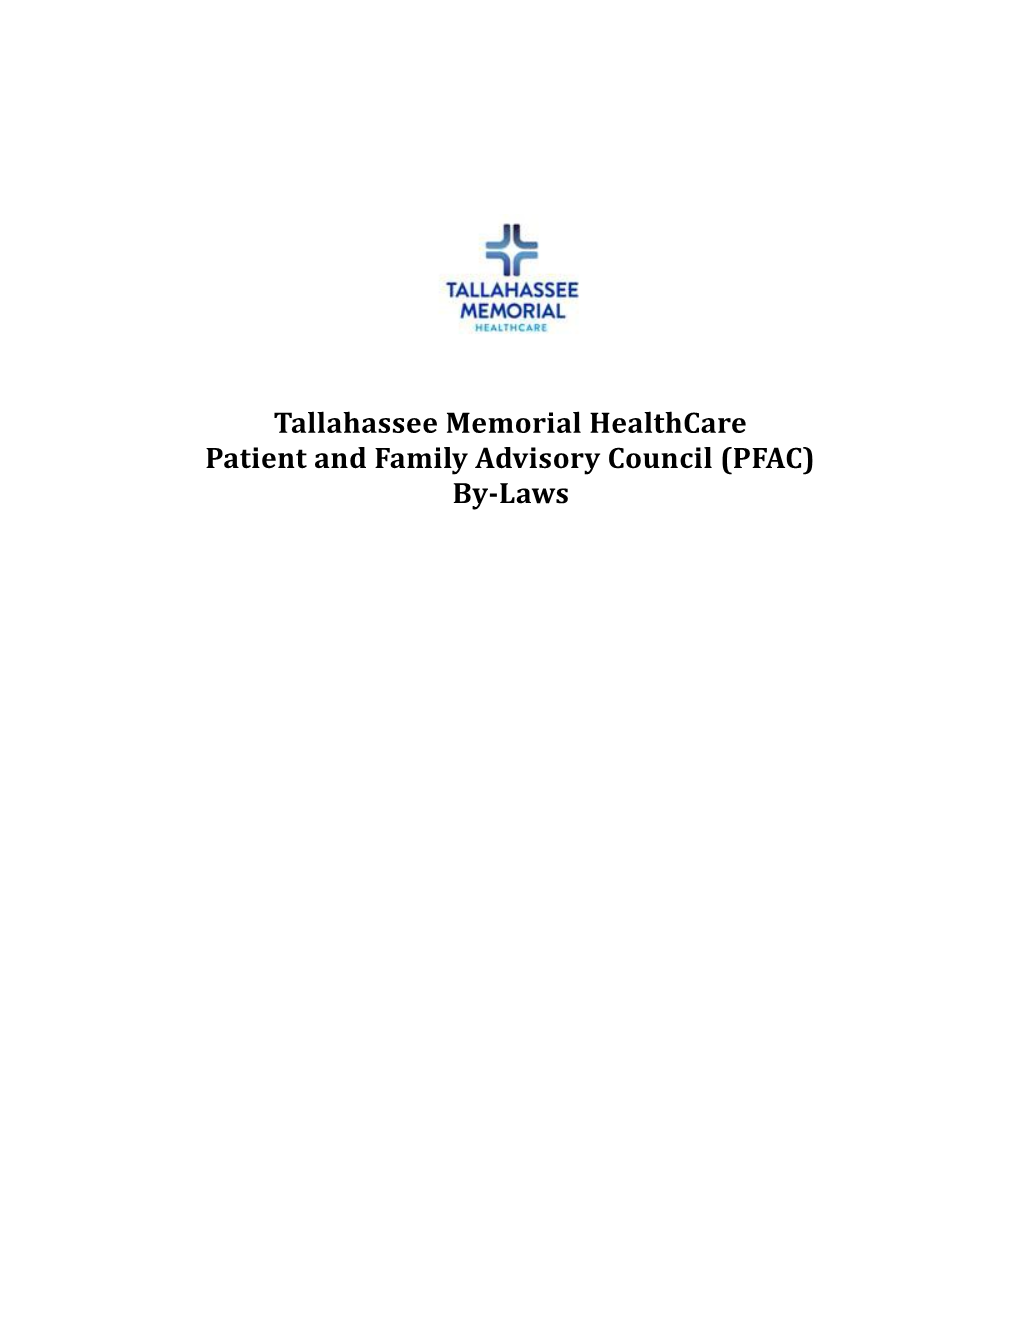 Patient and Family Advisory Council (PFAC)